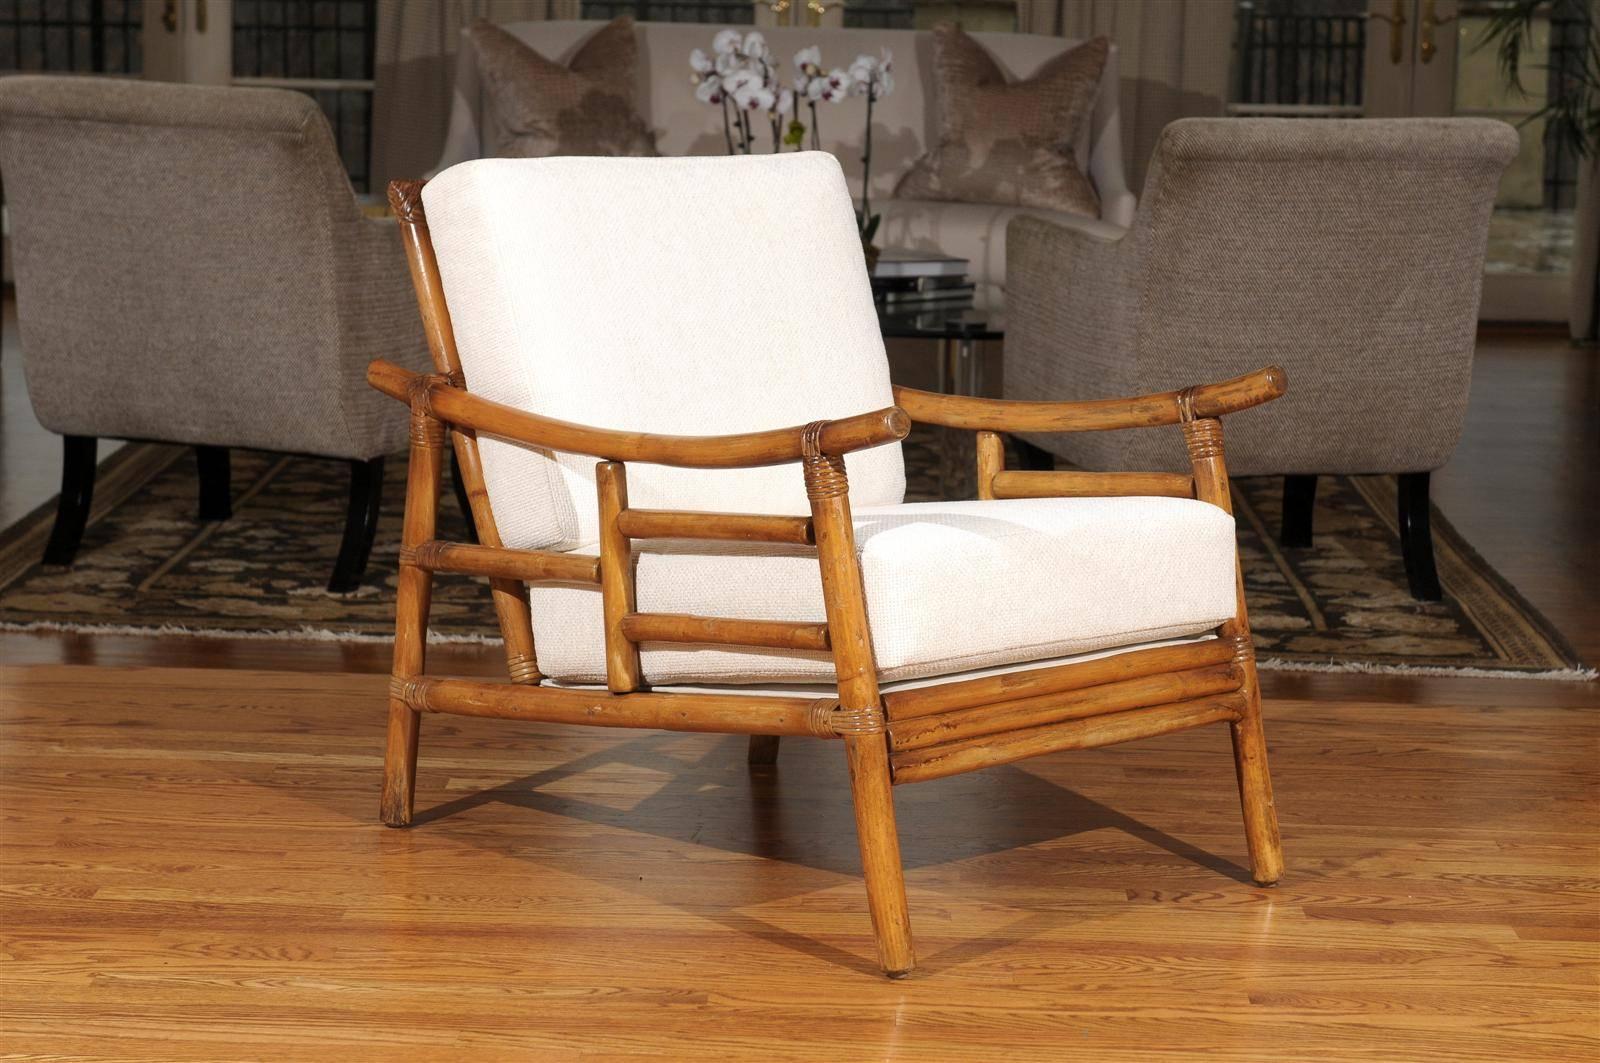 An exceptional pair from a difficult to find series of Campaign style chairs.  Rattan and hardwood construction with beautiful raffia binding detail.  Stout, comfortable and expertly made.  Aged to absolute perfection !  These unusual pieces were a